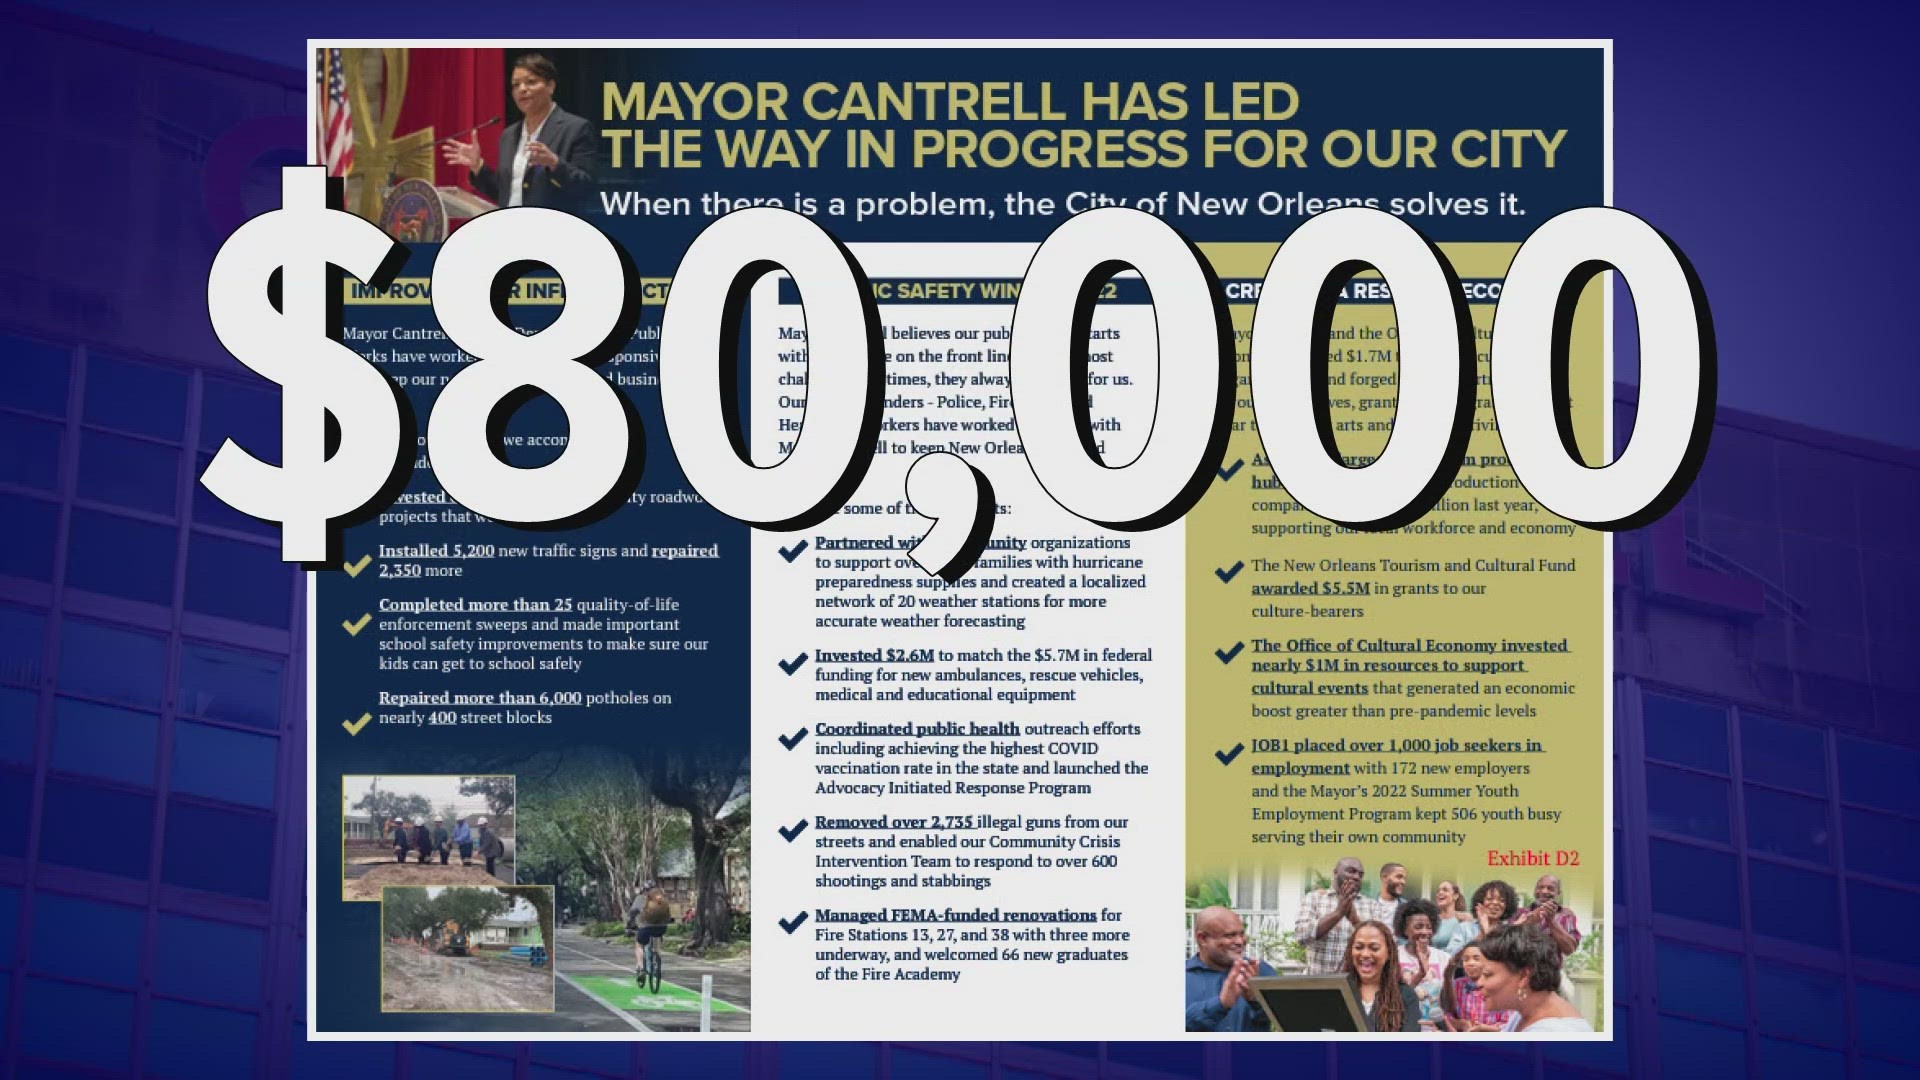 This comes as the council is wrapping up its four-month investigation into the glossy tri-fold mailer that went out to 106,000 households in the city in January.